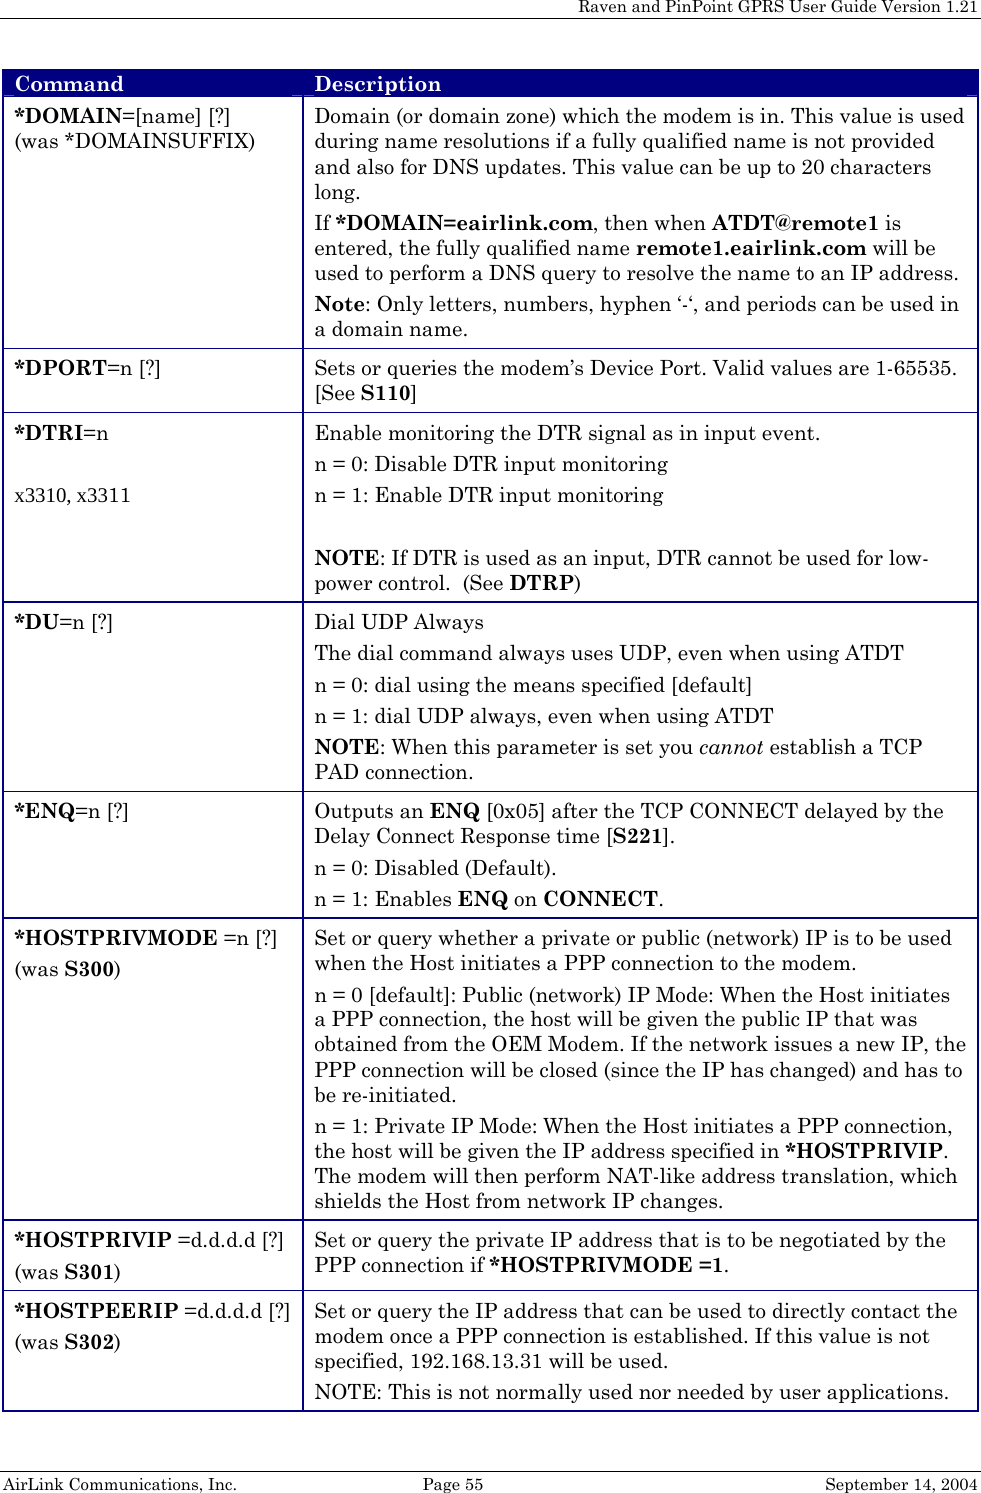 Raven and PinPoint GPRS User Guide Version 1.21 Command Description *DOMAIN=[name] [?] (was *DOMAINSUFFIX) Domain (or domain zone) which the modem is in. This value is used during name resolutions if a fully qualified name is not provided and also for DNS updates. This value can be up to 20 characters long. If *DOMAIN=eairlink.com, then when ATDT@remote1 is entered, the fully qualified name remote1.eairlink.com will be used to perform a DNS query to resolve the name to an IP address. Note: Only letters, numbers, hyphen ‘-‘, and periods can be used in a domain name. *DPORT=n [?] Sets or queries the modem’s Device Port. Valid values are 1-65535. [See S110] *DTRI=n  x3310, x3311 Enable monitoring the DTR signal as in input event. n = 0: Disable DTR input monitoring n = 1: Enable DTR input monitoring  NOTE: If DTR is used as an input, DTR cannot be used for low-power control.  (See DTRP) *DU=n [?] Dial UDP Always  The dial command always uses UDP, even when using ATDT n = 0: dial using the means specified [default] n = 1: dial UDP always, even when using ATDT NOTE: When this parameter is set you cannot establish a TCP PAD connection. *ENQ=n [?] Outputs an ENQ [0x05] after the TCP CONNECT delayed by the Delay Connect Response time [S221]. n = 0: Disabled (Default). n = 1: Enables ENQ on CONNECT. *HOSTPRIVMODE =n [?] (was S300) Set or query whether a private or public (network) IP is to be used when the Host initiates a PPP connection to the modem. n = 0 [default]: Public (network) IP Mode: When the Host initiates a PPP connection, the host will be given the public IP that was obtained from the OEM Modem. If the network issues a new IP, the PPP connection will be closed (since the IP has changed) and has to be re-initiated. n = 1: Private IP Mode: When the Host initiates a PPP connection, the host will be given the IP address specified in *HOSTPRIVIP. The modem will then perform NAT-like address translation, which shields the Host from network IP changes. *HOSTPRIVIP =d.d.d.d [?] (was S301) Set or query the private IP address that is to be negotiated by the PPP connection if *HOSTPRIVMODE =1. *HOSTPEERIP =d.d.d.d [?] (was S302) Set or query the IP address that can be used to directly contact the modem once a PPP connection is established. If this value is not specified, 192.168.13.31 will be used. NOTE: This is not normally used nor needed by user applications. AirLink Communications, Inc.  Page 55  September 14, 2004 